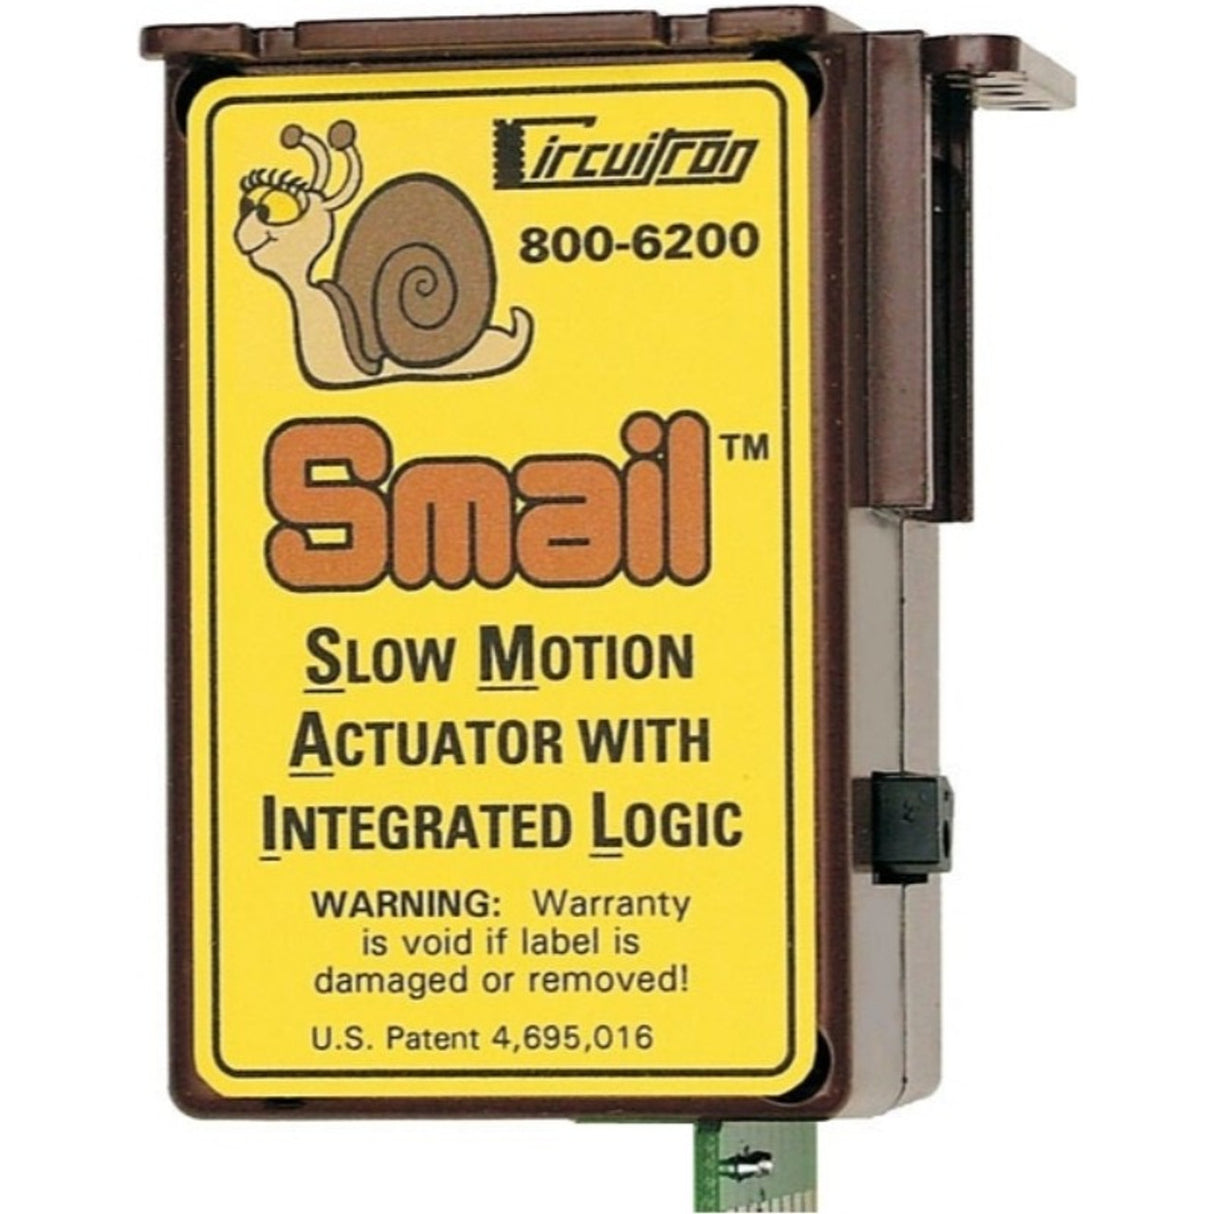 Circuitron Smail Slow Motion Actuator with Integrated Logic DCC Equipped